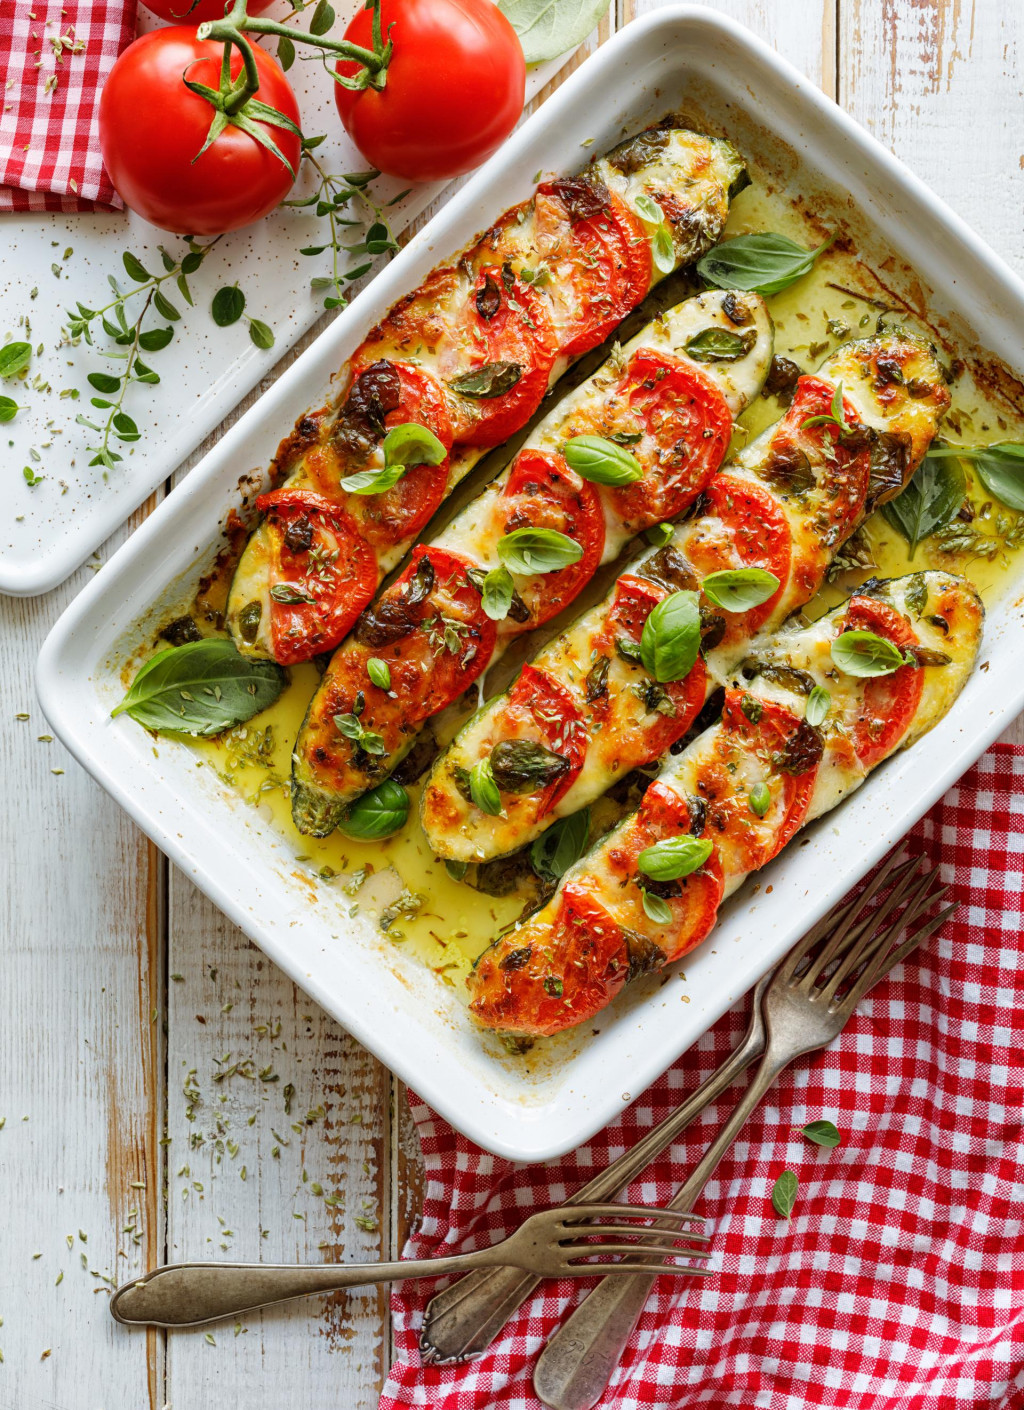 Roasted, stuffed zucchini with the addition of tomatoes, mozzarella cheese, fresh basil and olive oil (caprese salad) in a ceramic baking dish, close-up, top view. Nutritious and tasty vegetarian dish